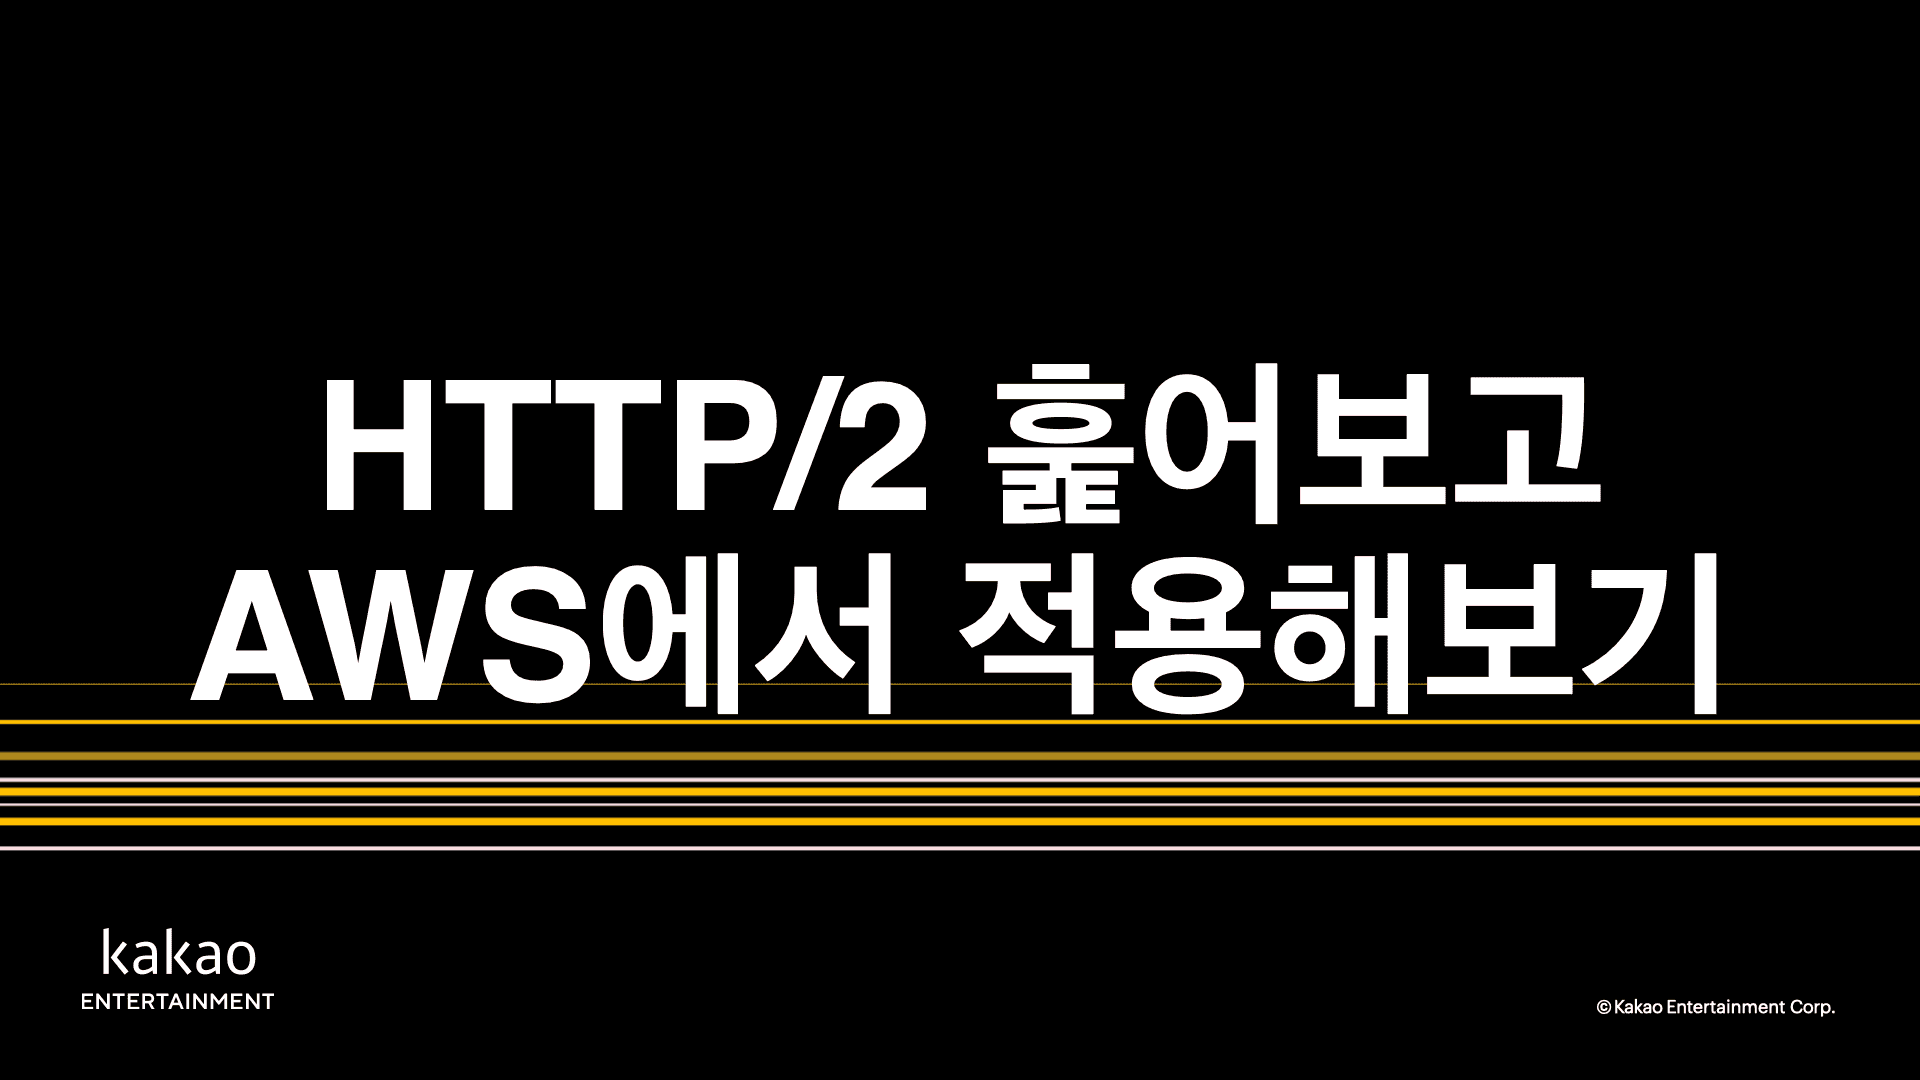 thumbnail-image-/2022/220424-http2-with-aws/